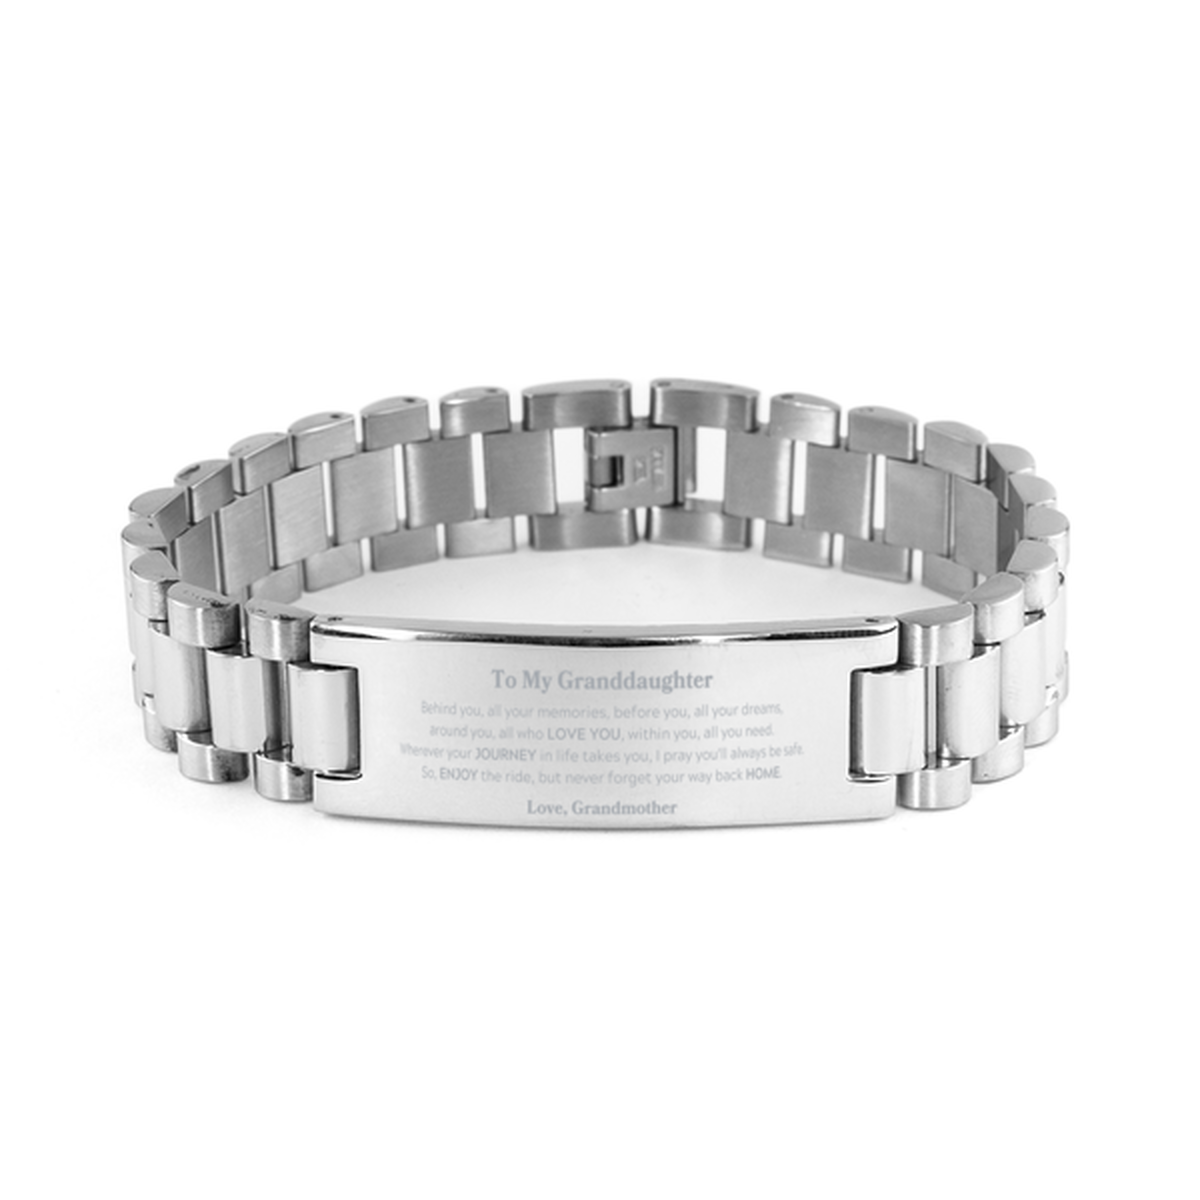 To My Granddaughter Graduation Gifts from Grandmother, Granddaughter Ladder Stainless Steel Bracelet Christmas Birthday Gifts for Granddaughter Behind you, all your memories, before you, all your dreams. Love, Grandmother